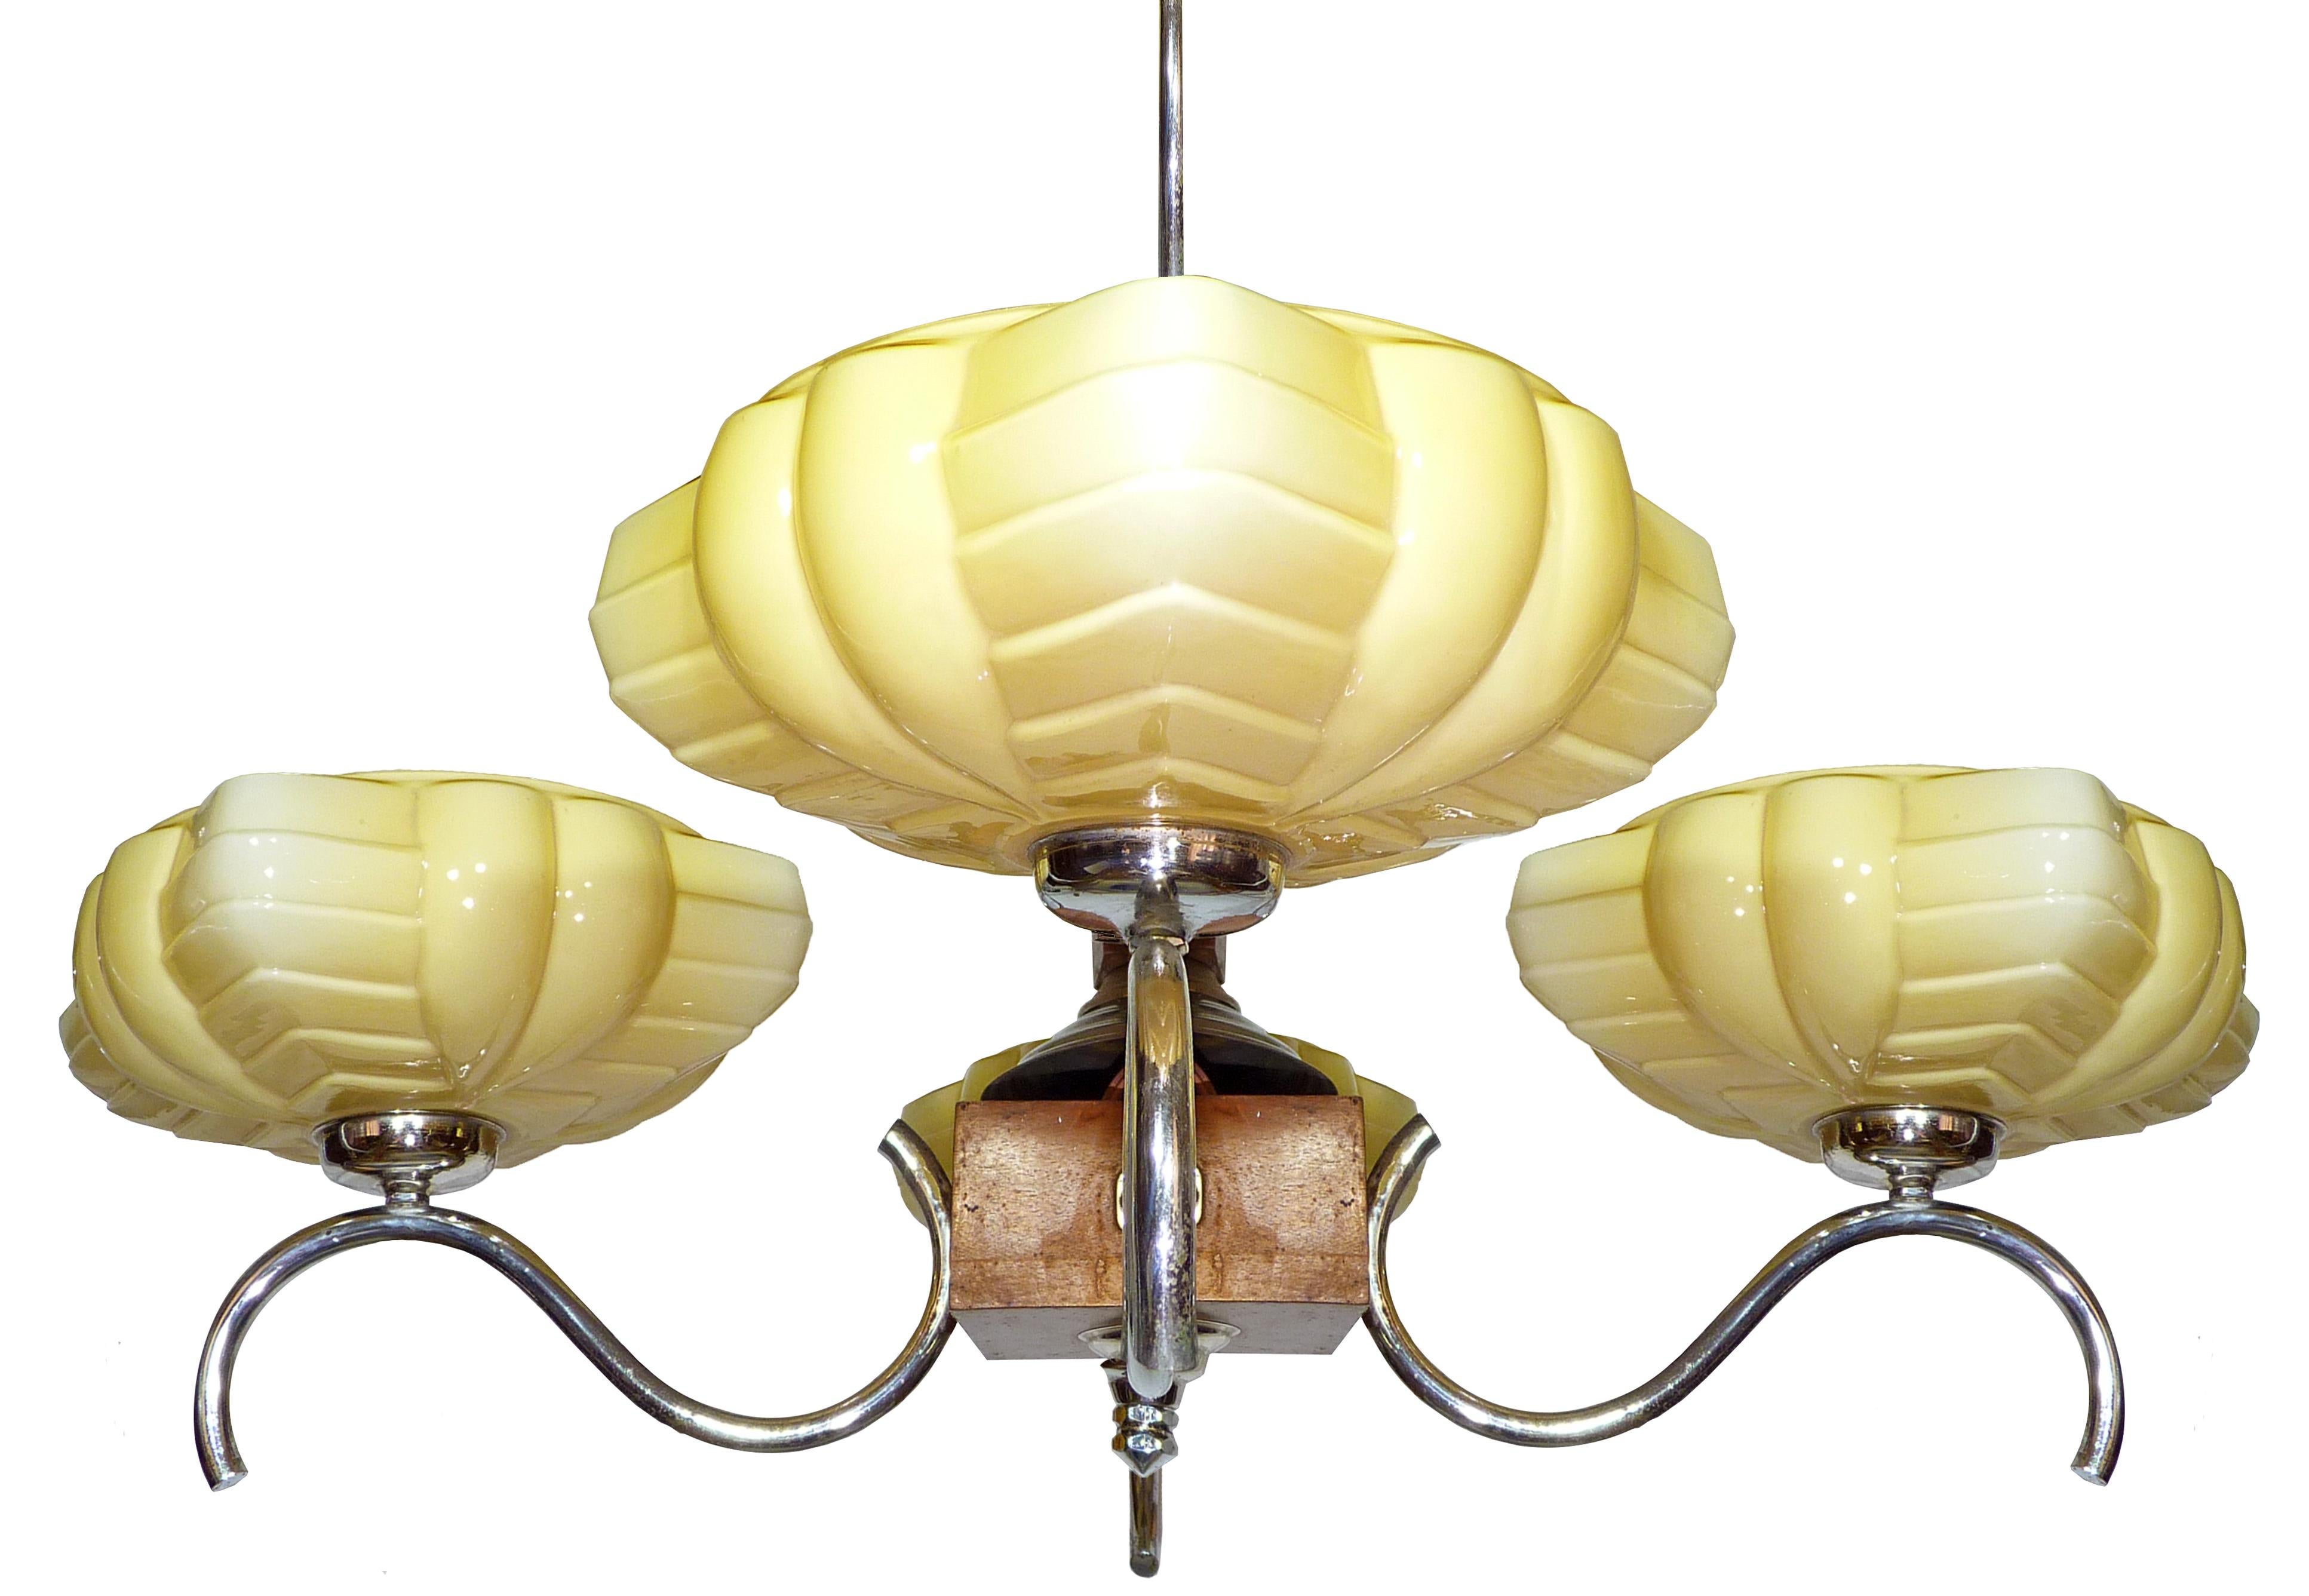 Original French Art Deco modernist ceiling lamp, yellow opaline glass shades Bauhaus chandelier
Materials: Opaline glass/ wood/ chrome
Measures:
Diameter: 31.5 in / 90 cm
Height: 40 in / 80 cm 
Glass Shades: 8.6 in / 22 cm 
Weight: 9 lb. (4